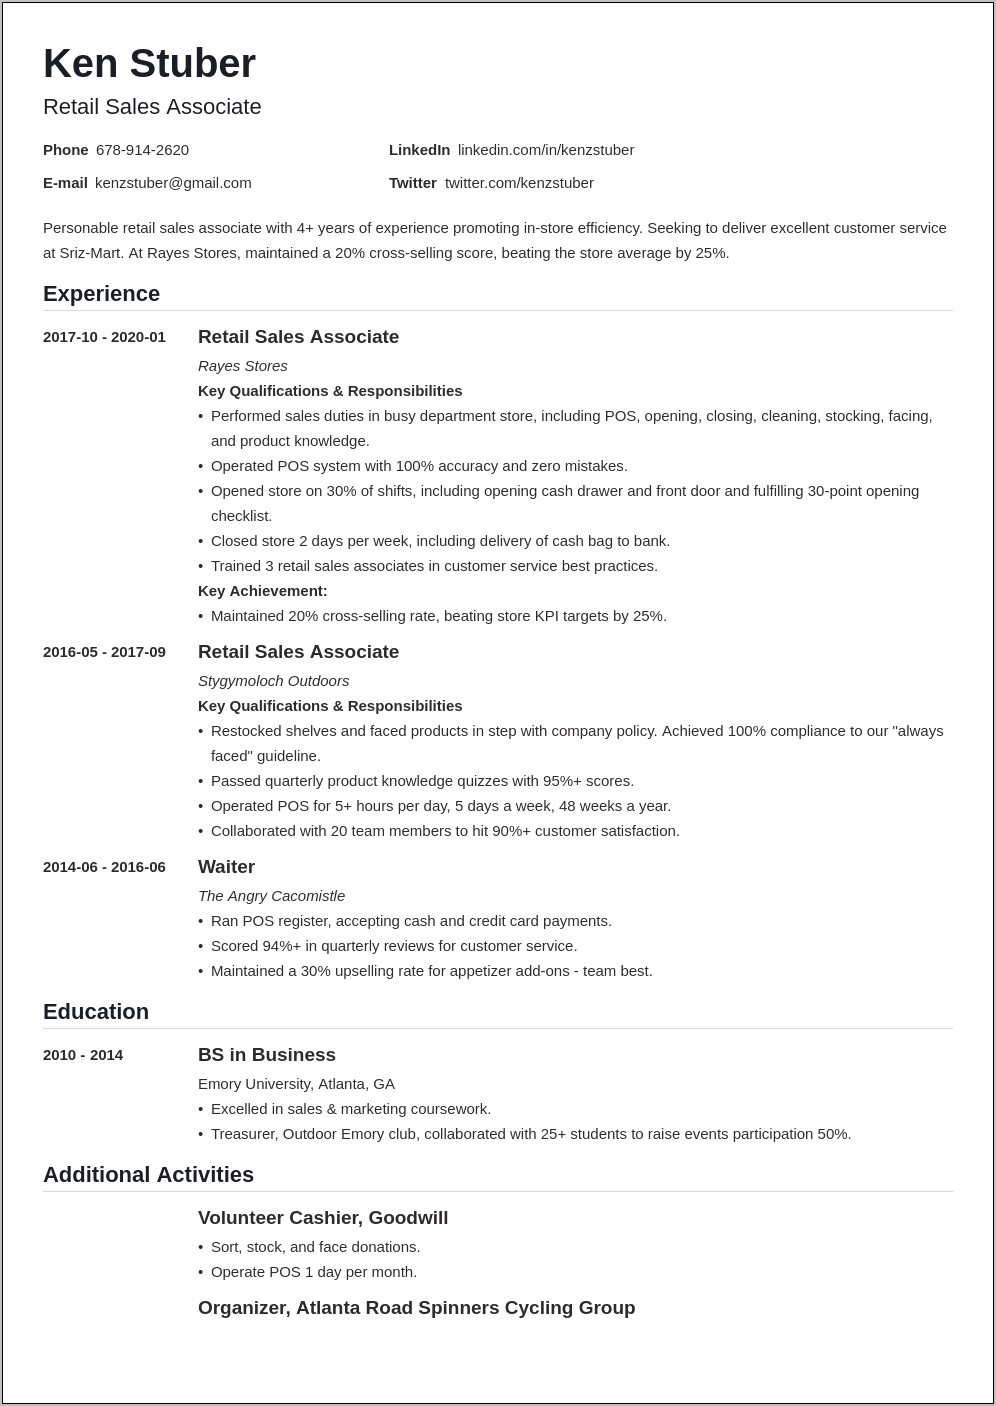 Resume Objective Statement Retail Example